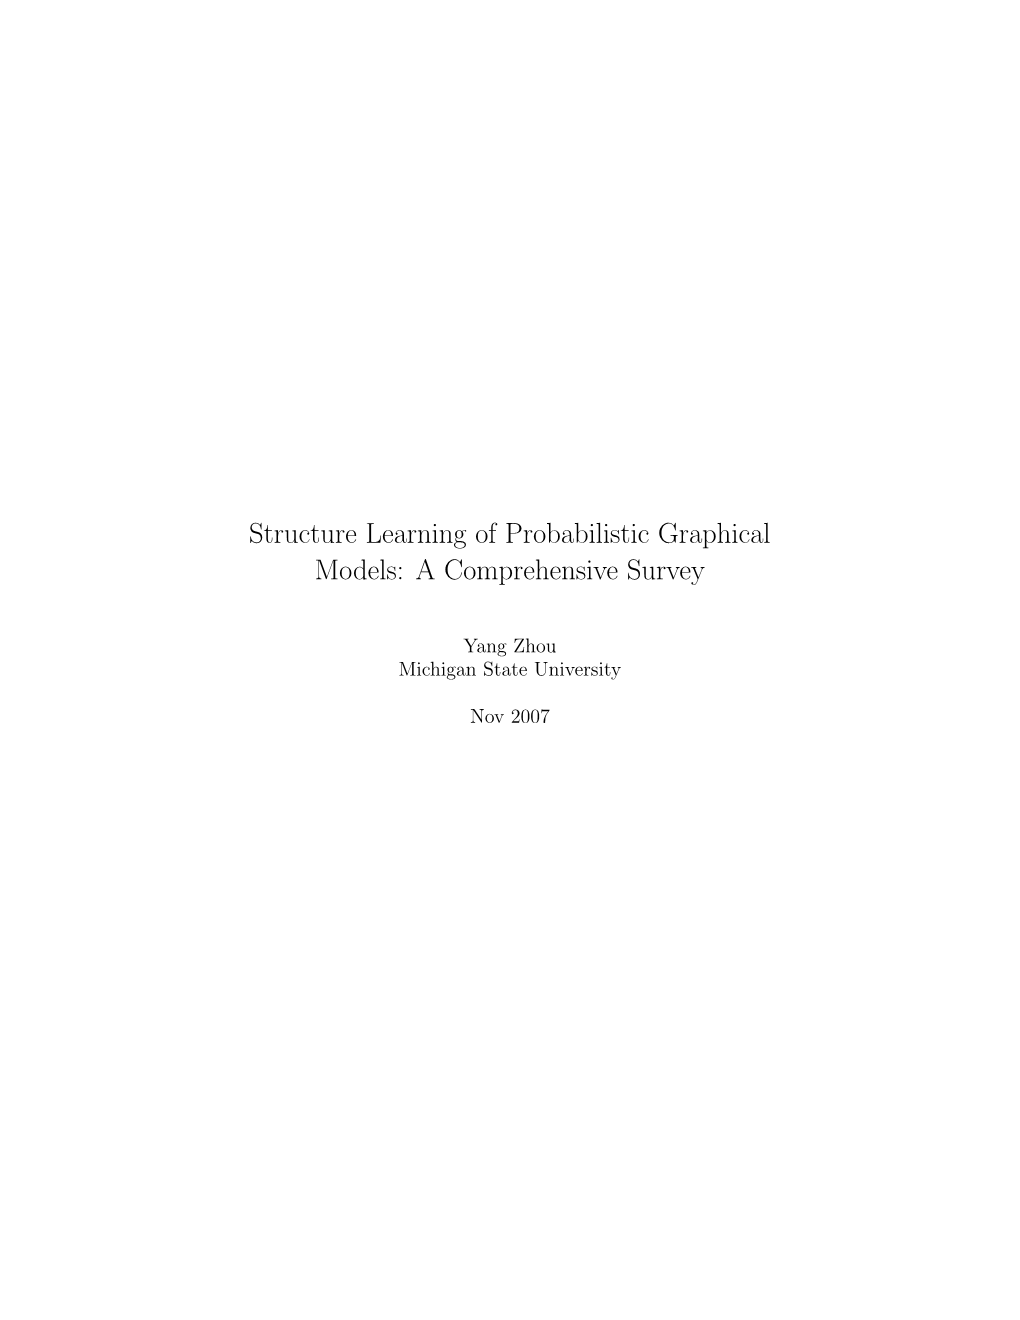 Structure Learning of Probabilistic Graphical Models: a Comprehensive Survey